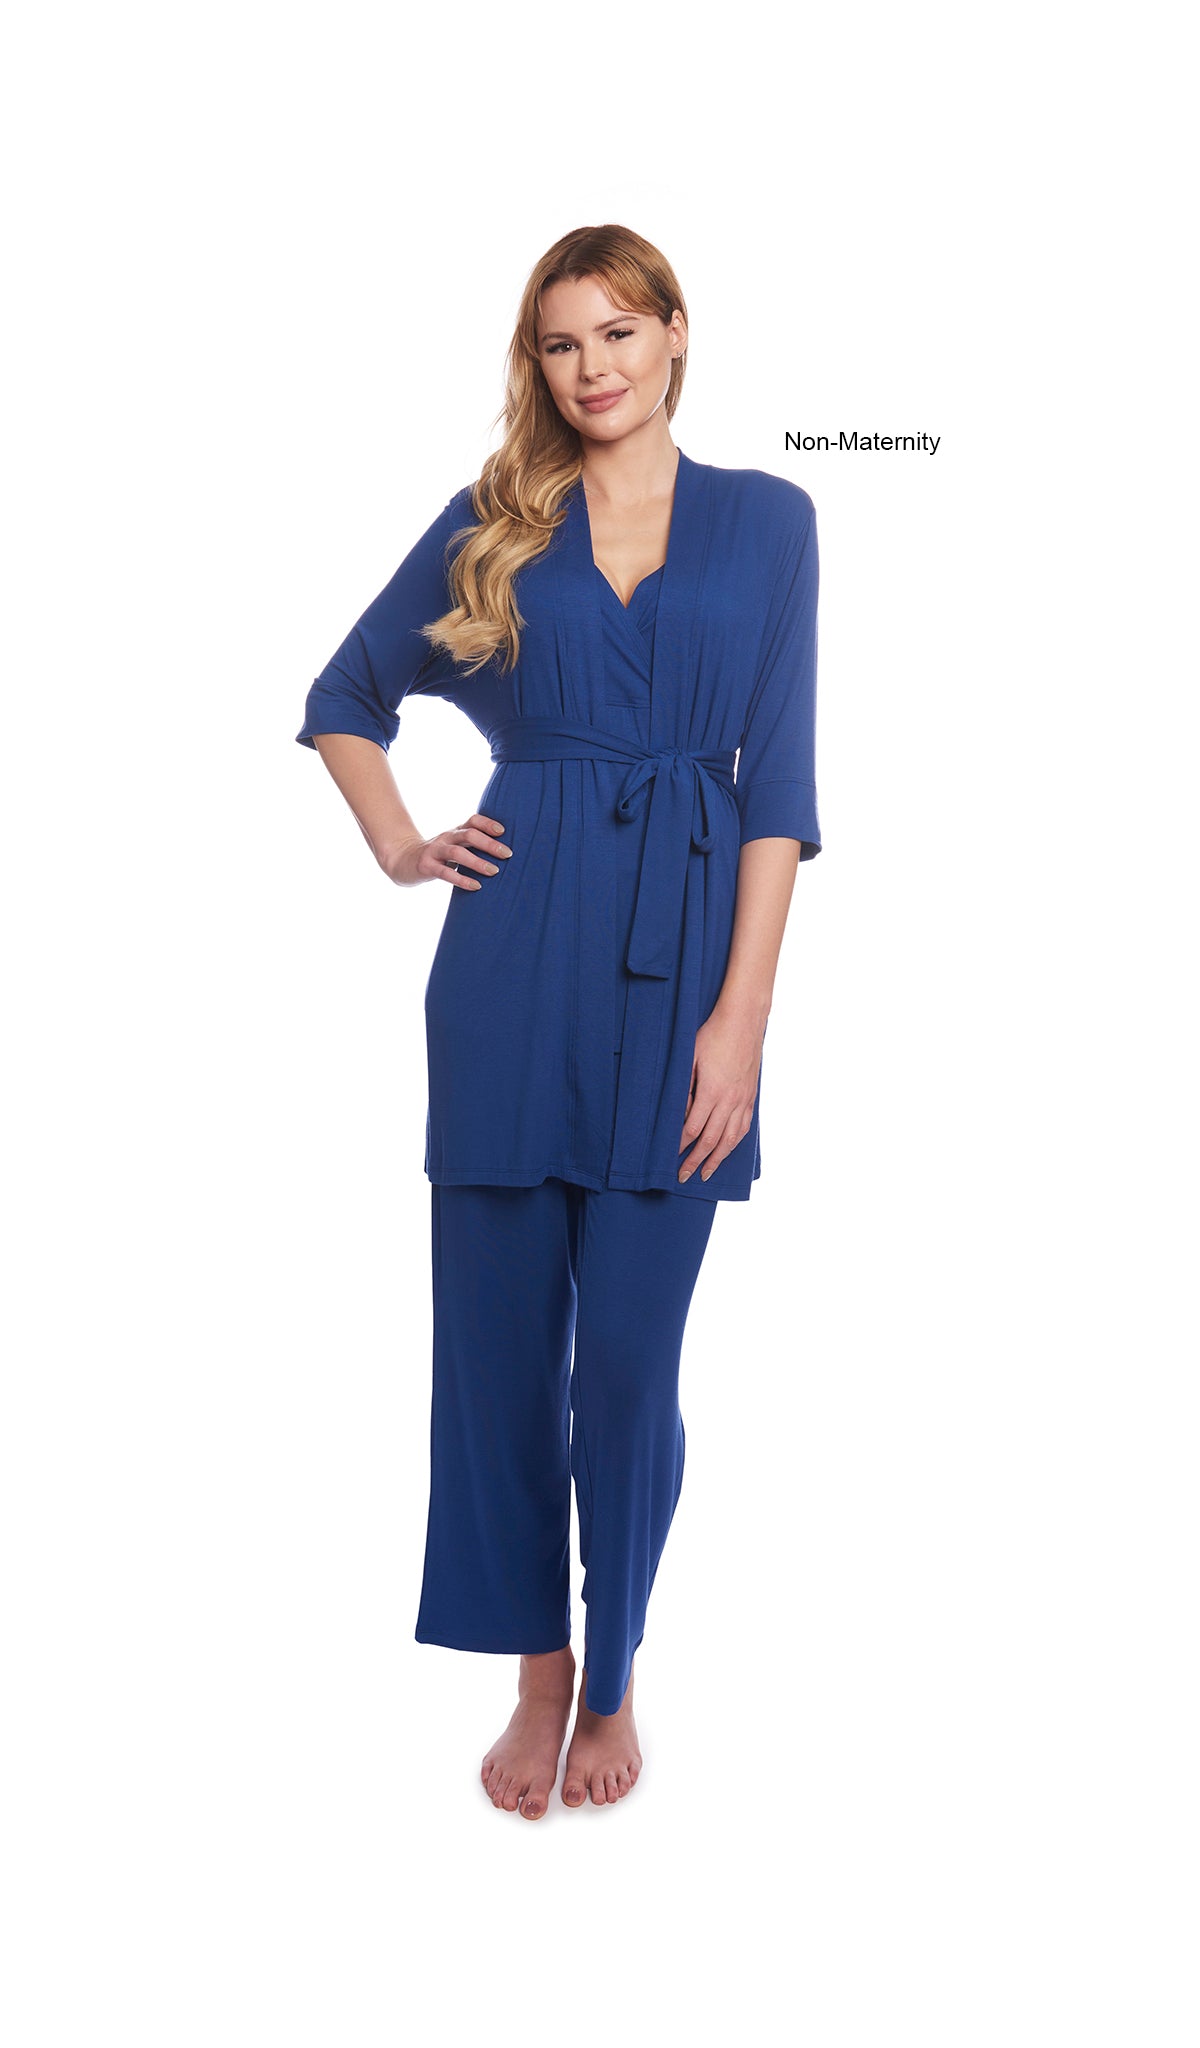 Denim Blue Analise 3-Piece Set. Woman wearing 3/4 sleeve robe, tank top and pant as non-maternity with one hand on hip.